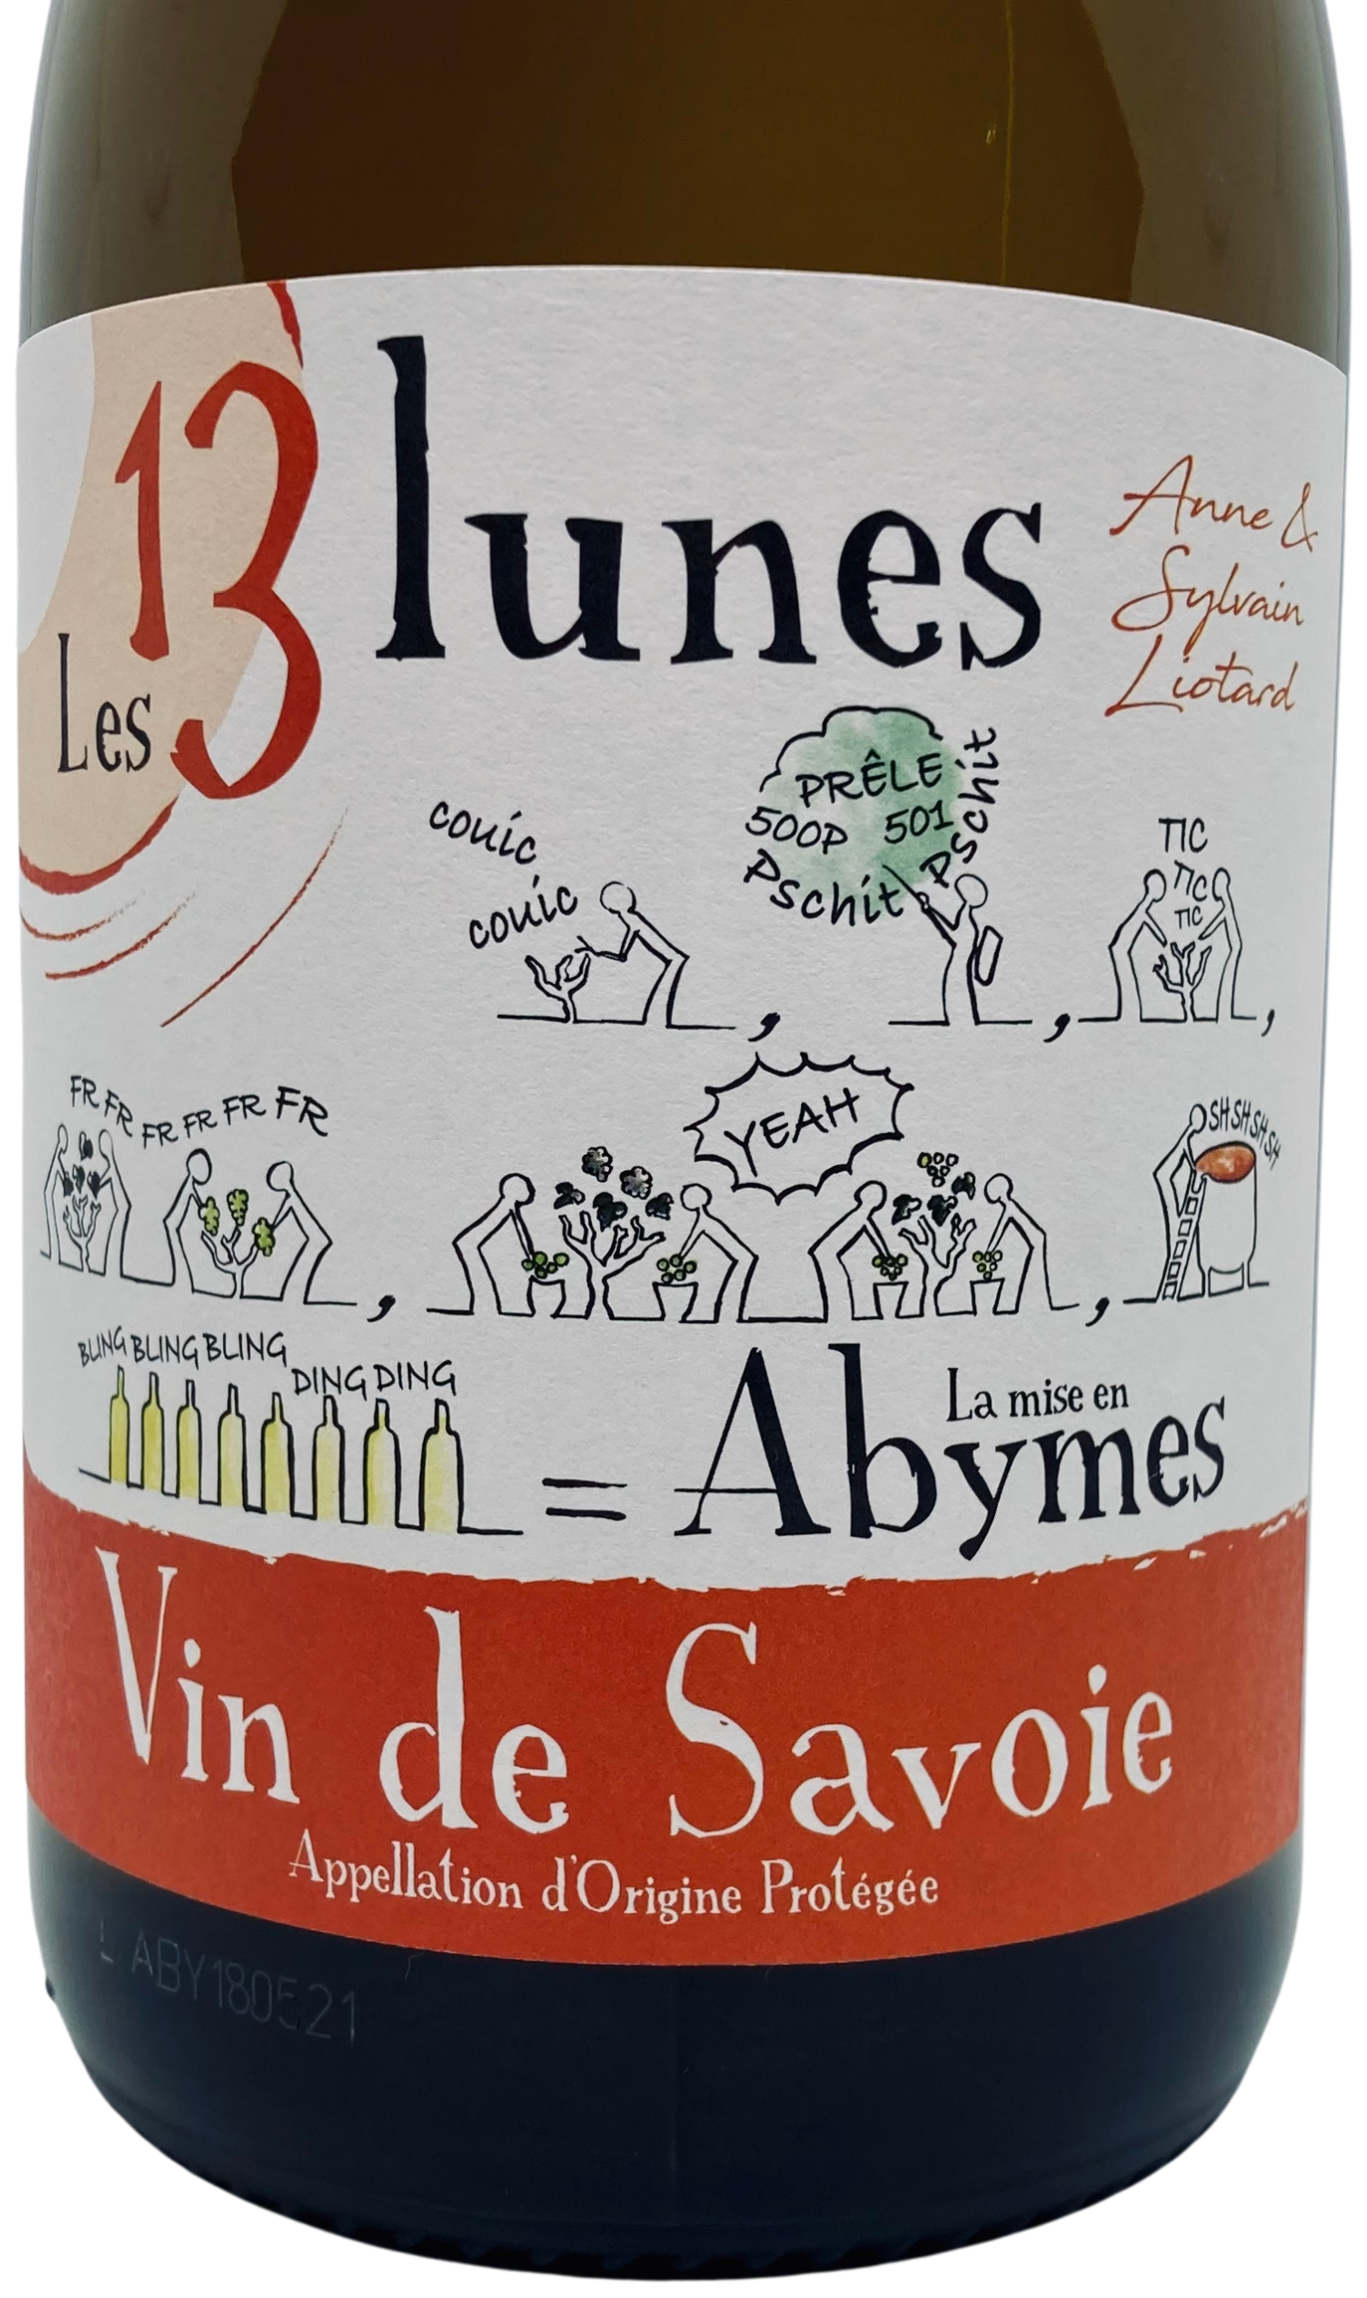 13lunes-abymes